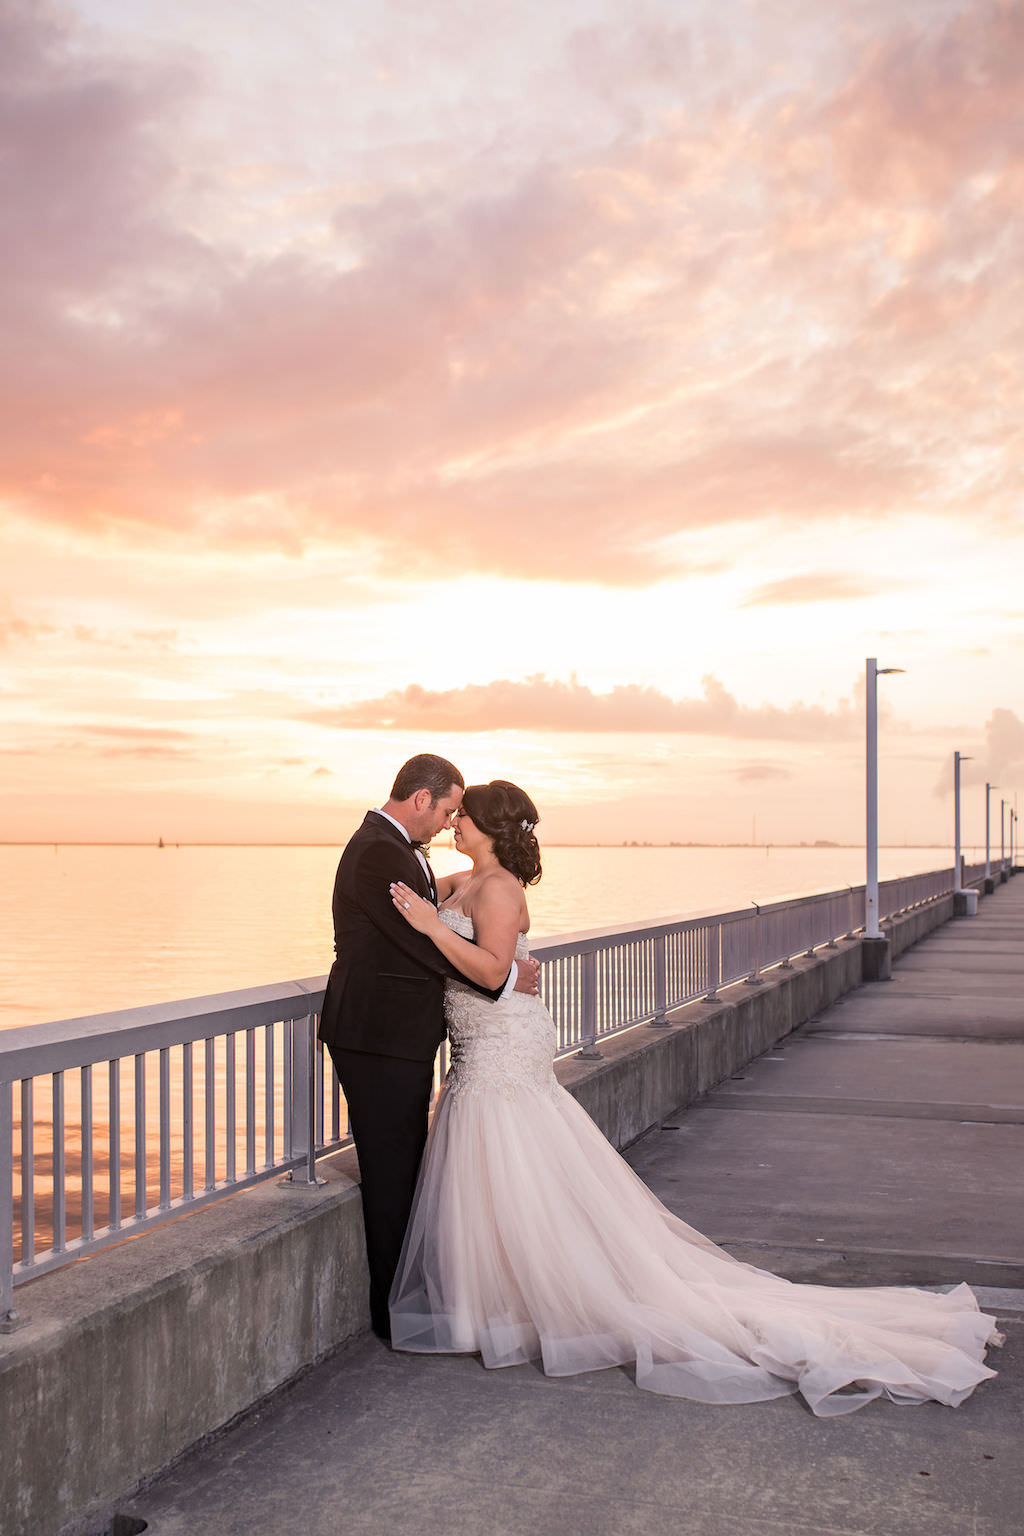 Tampa, Florida Bride and Groom Sunset Waterfront Wedding Portrait